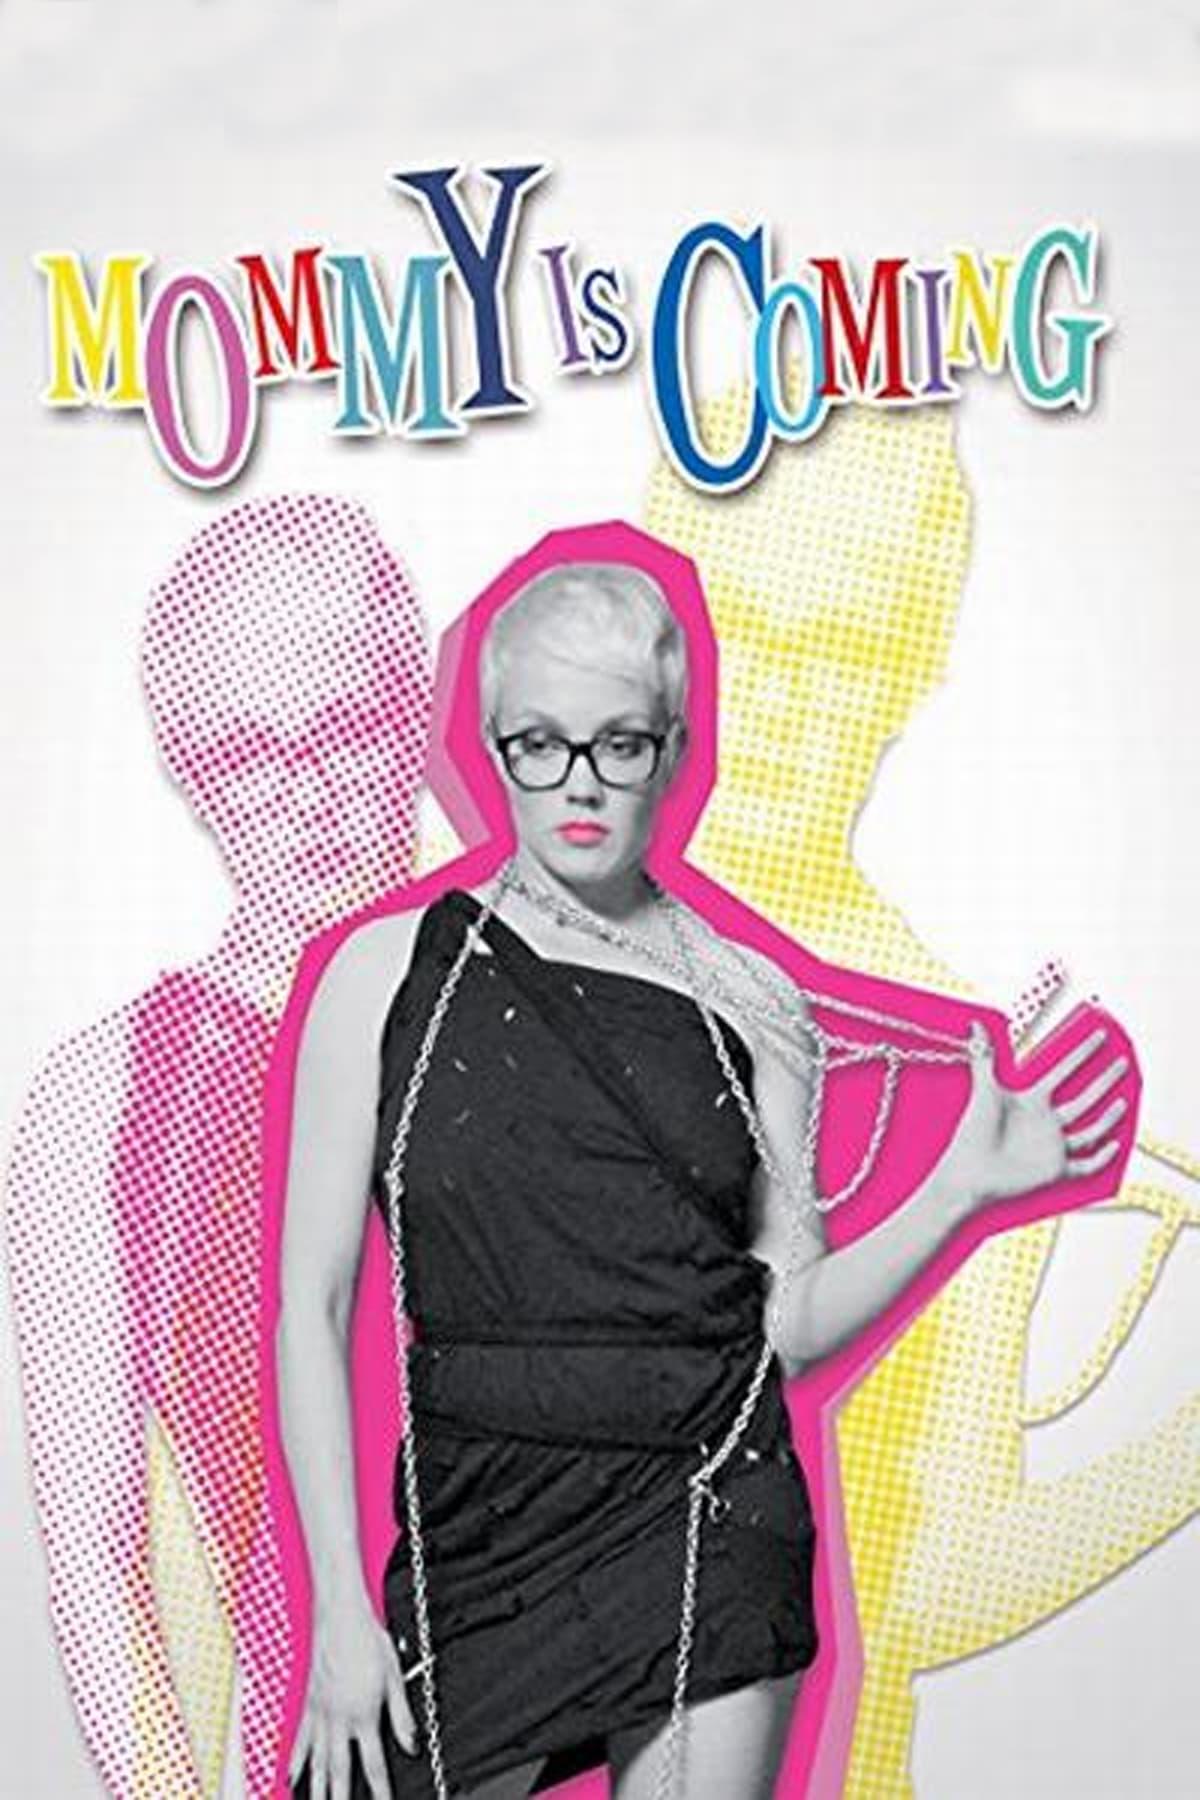 Mommy Is Coming poster